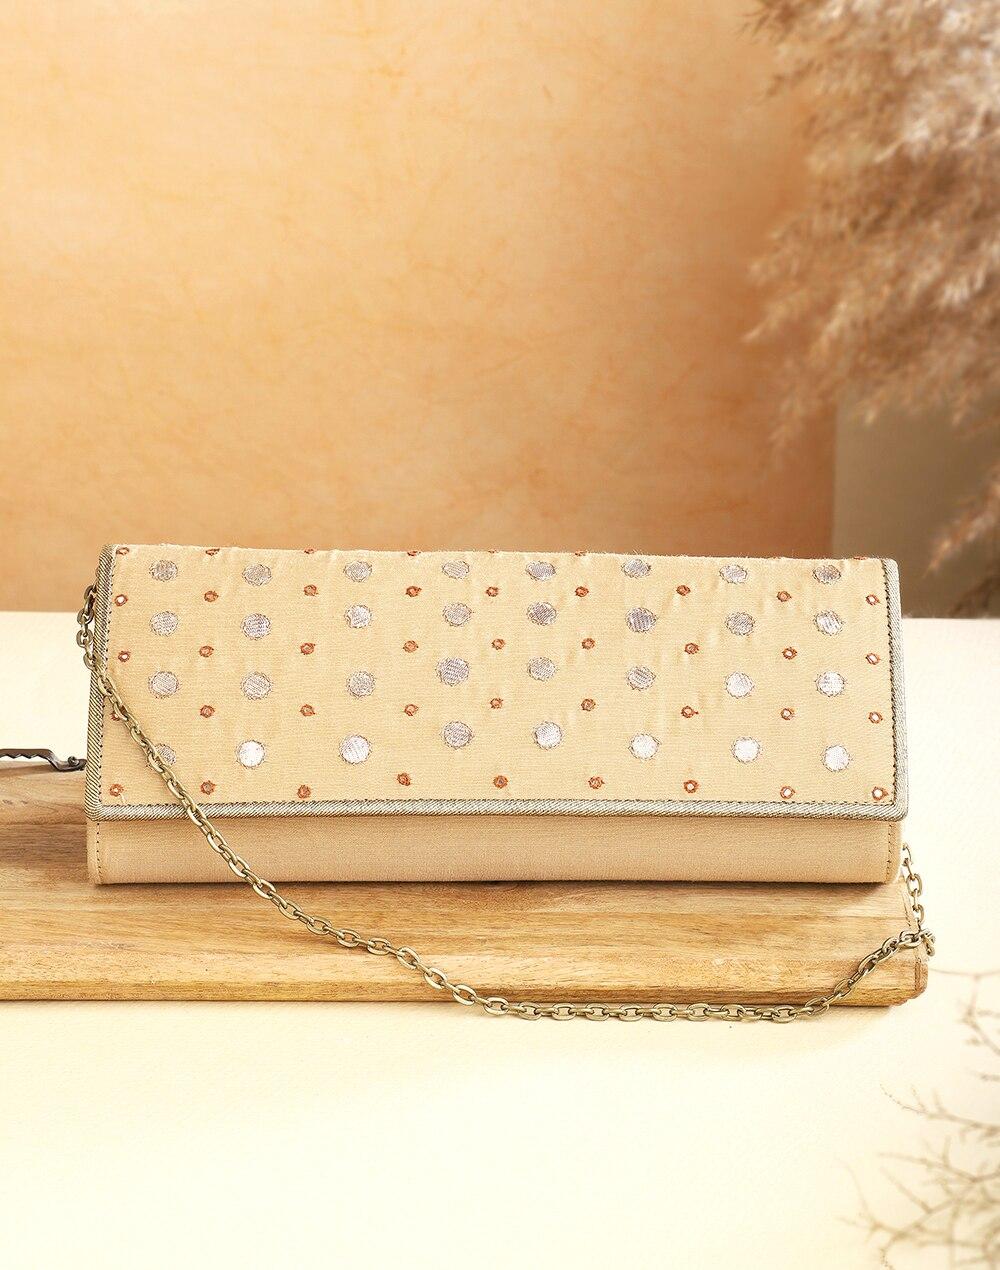 fabric-embroidered-clutch-bag